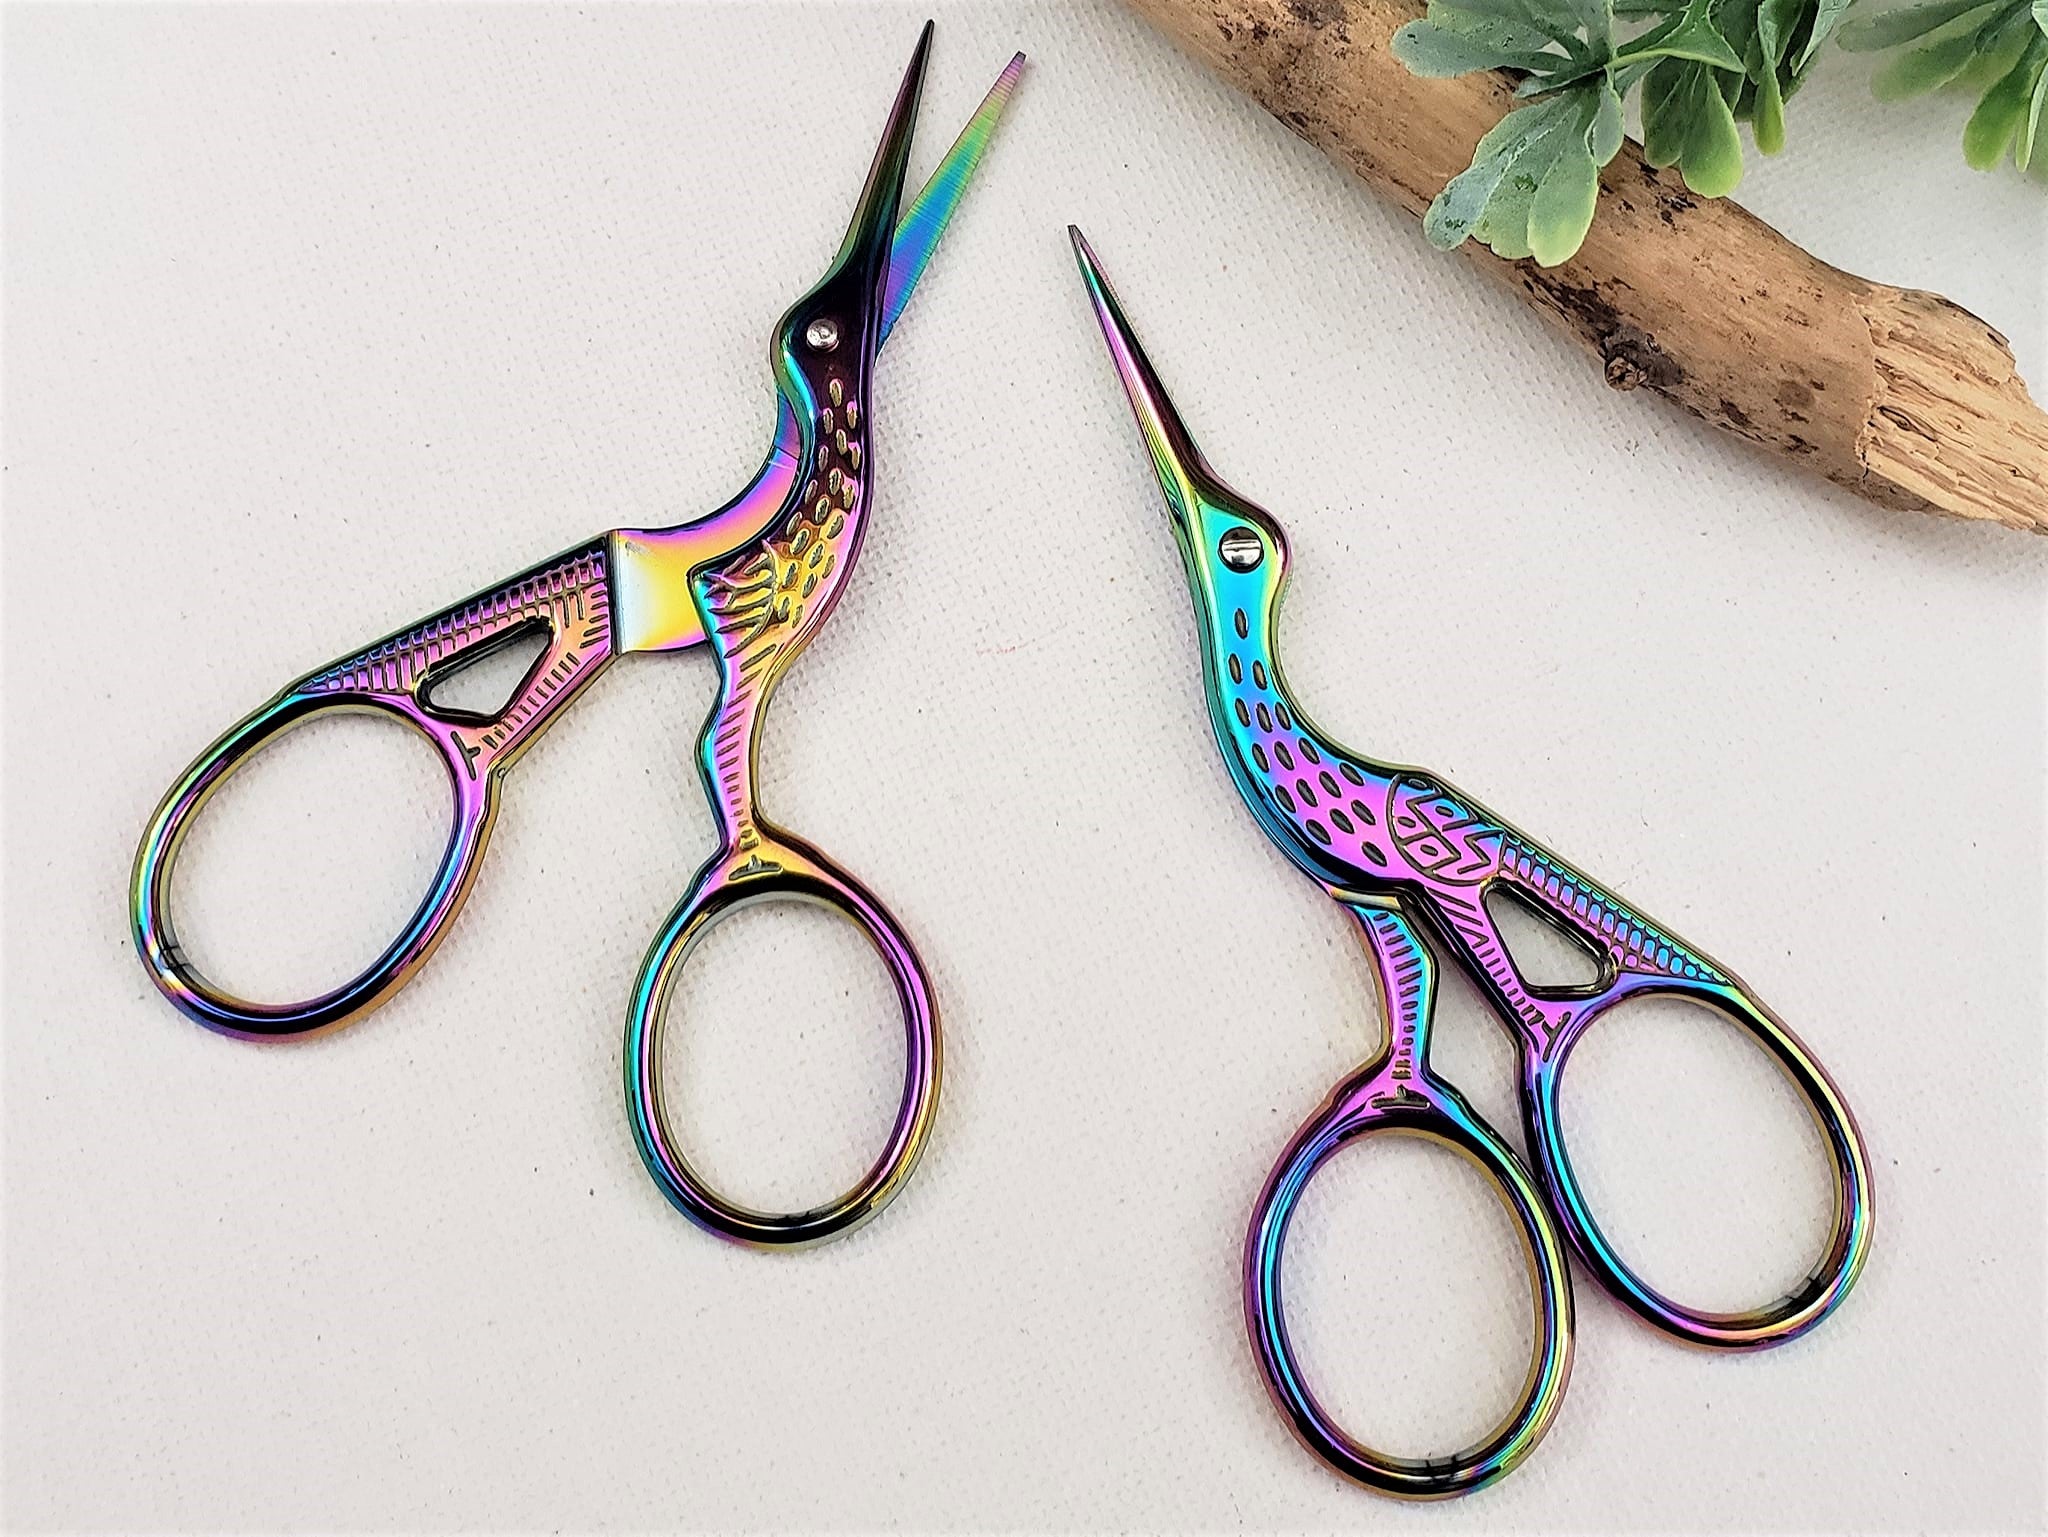 Stainless Steel Embroidery Stork Scissors